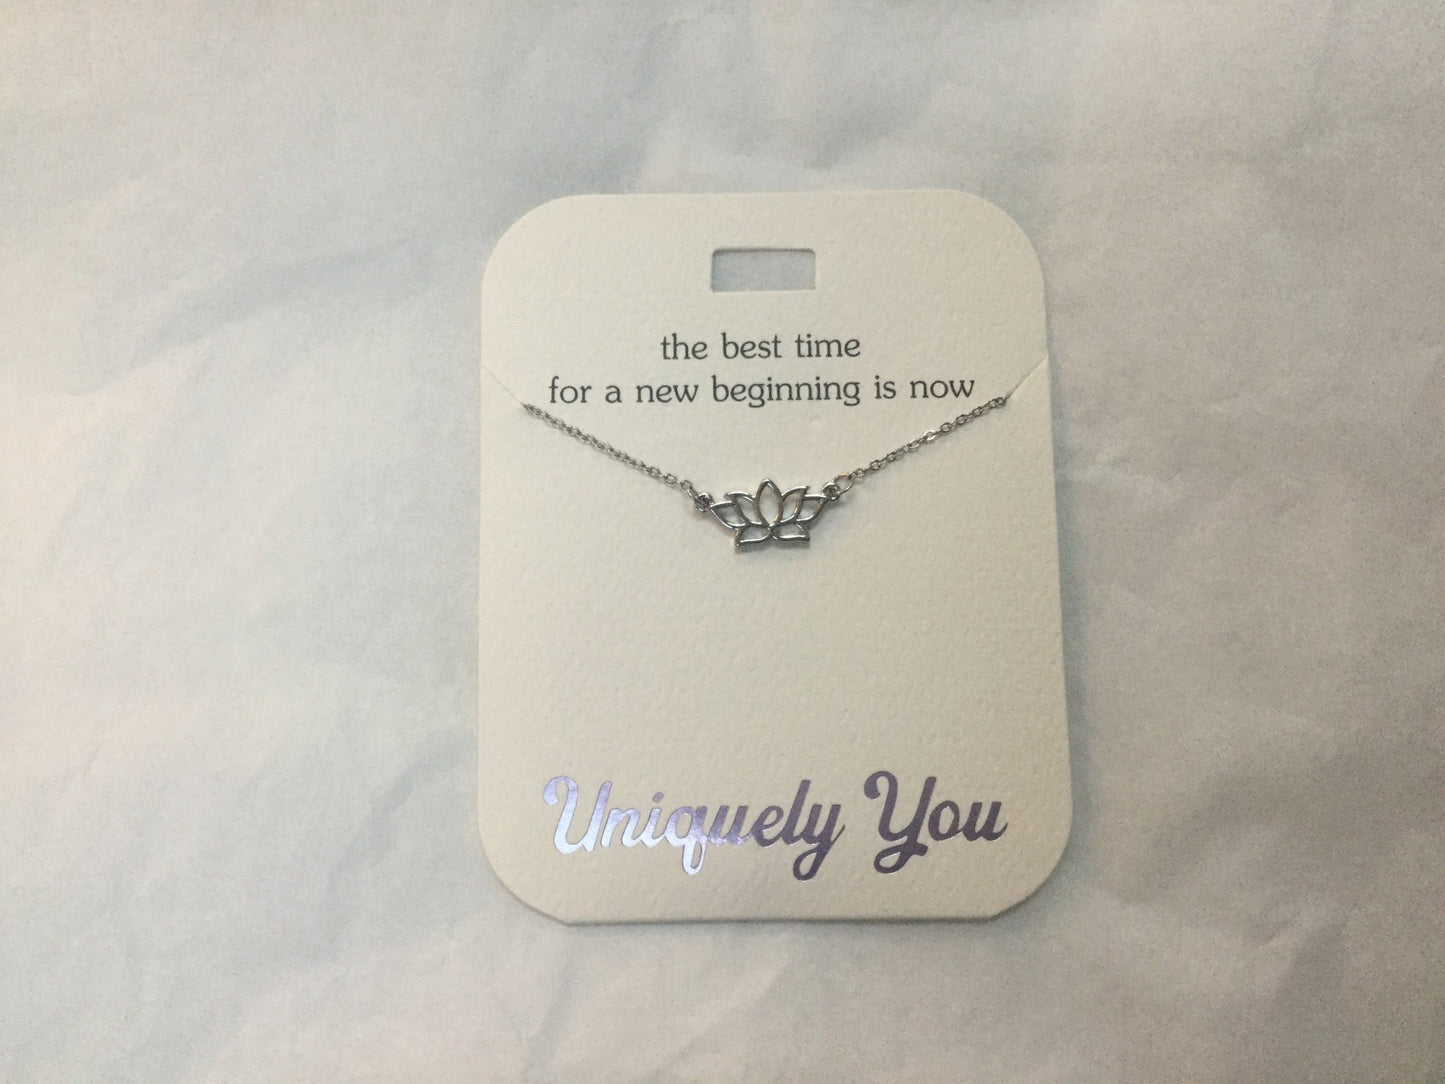 Necklace - YOU 4007 - The best time for a new beginning is now